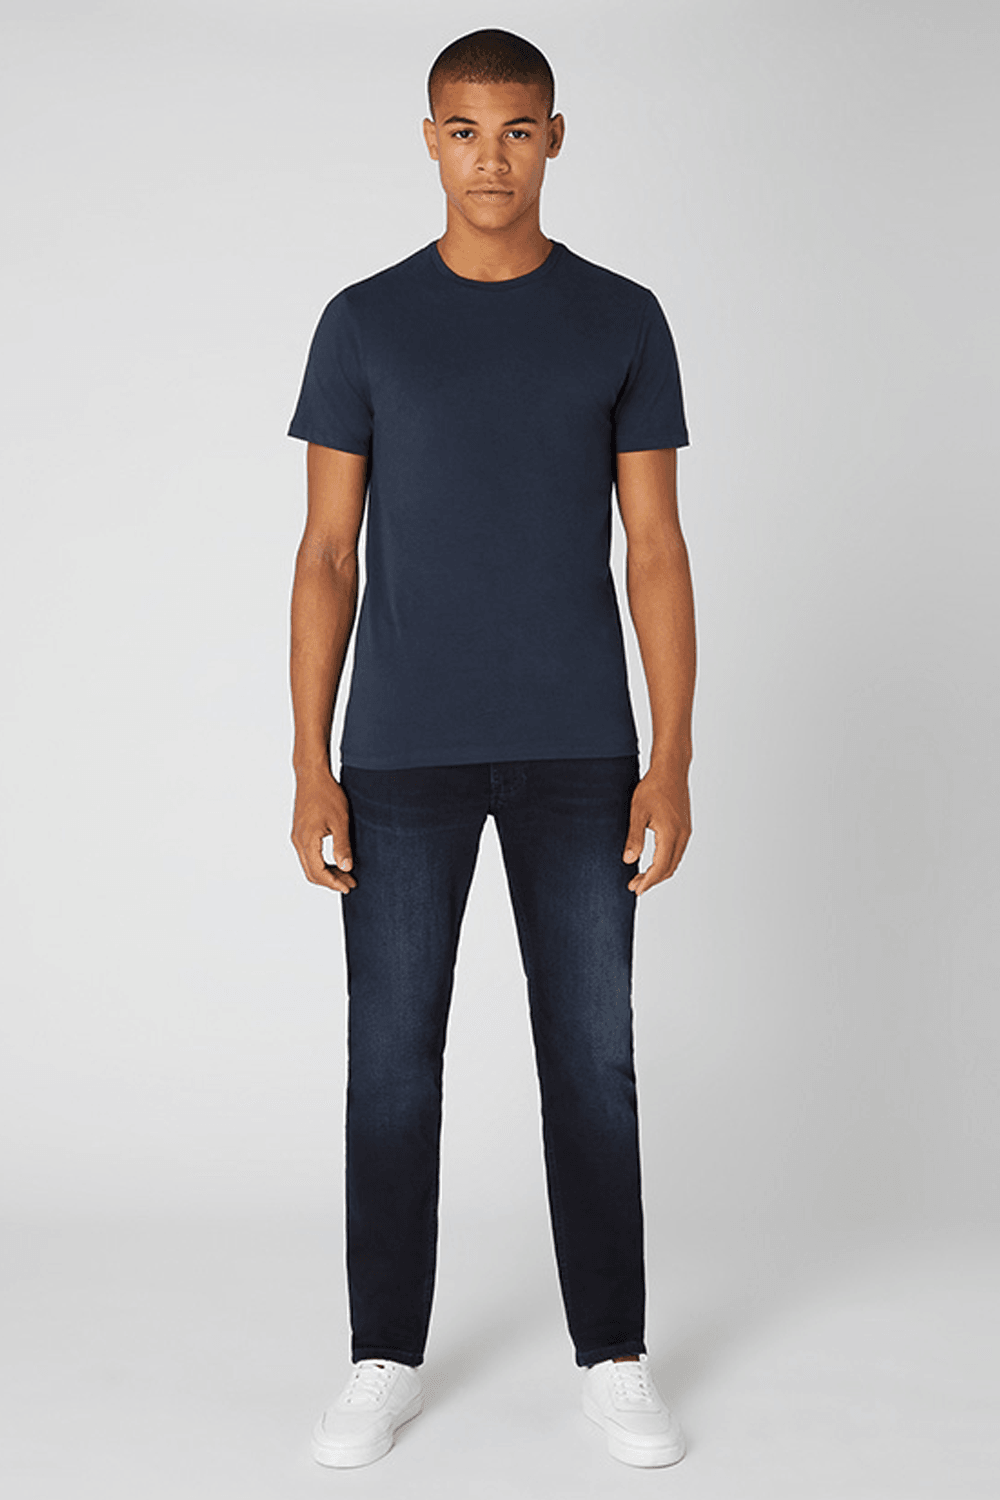 Buy the Remus Uomo Tapered Fit Cotton-Stretch T-Shirt in Navy at Intro. Spend £50 for free UK delivery. Official stockists. We ship worldwide.